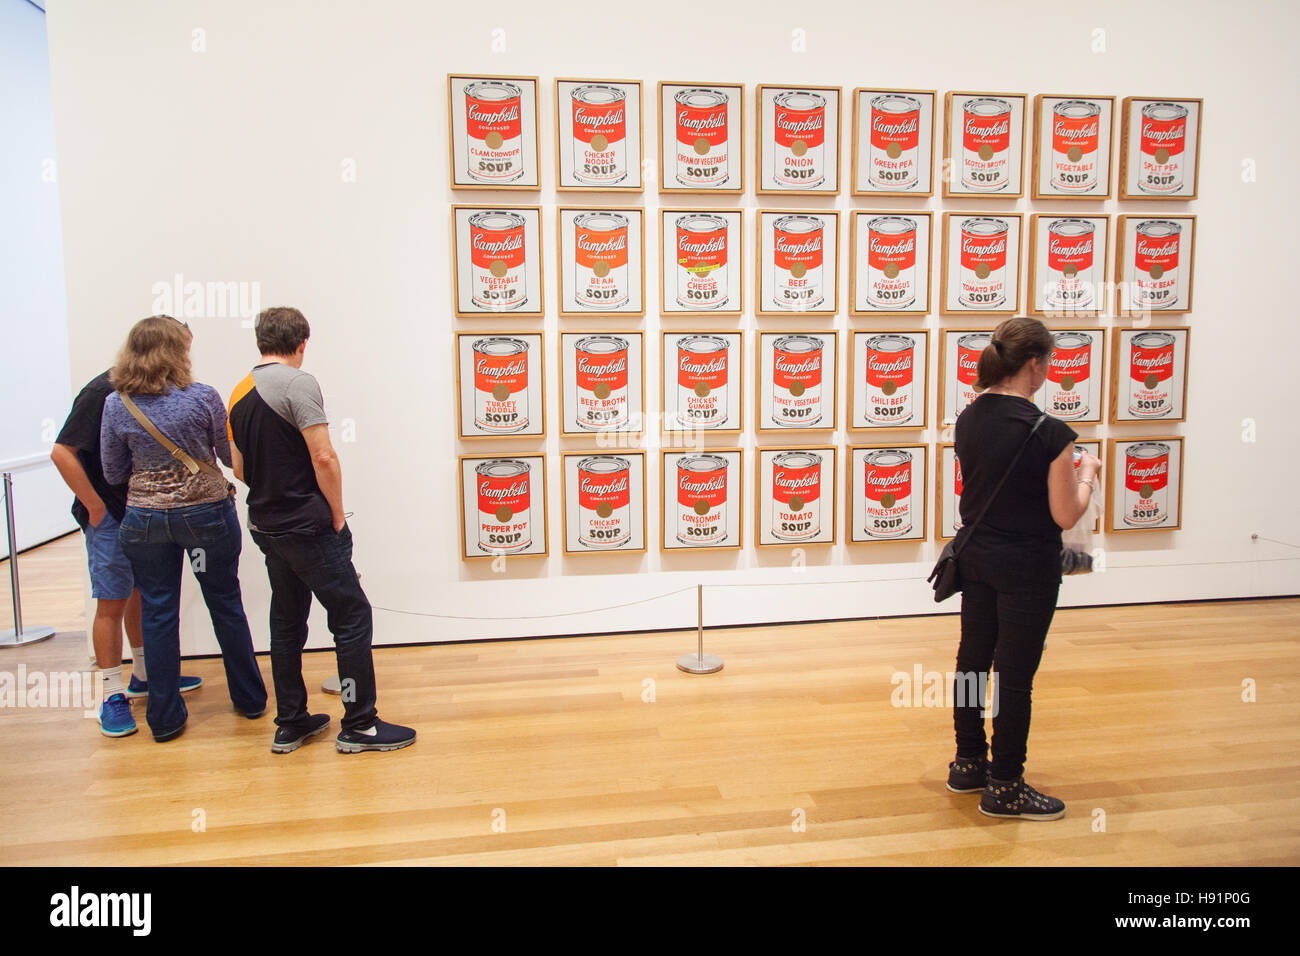 Andy Warhol,Campbell's soup cans paintings (1962) MoMa museum of modern art, New York City, United States of America. Stock Photo